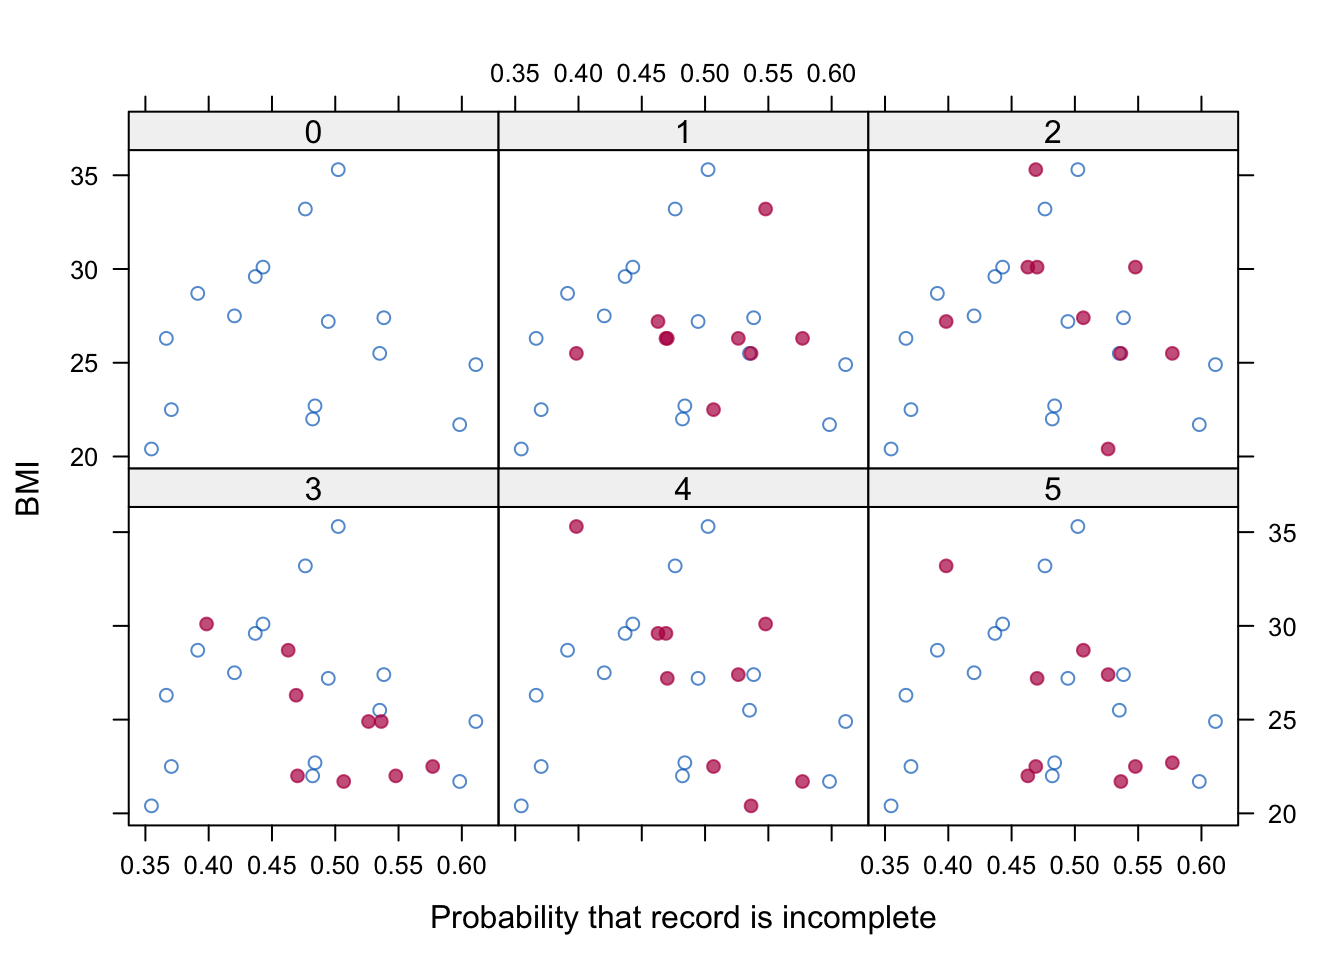 BMI against missingness probability for observed and imputed values.